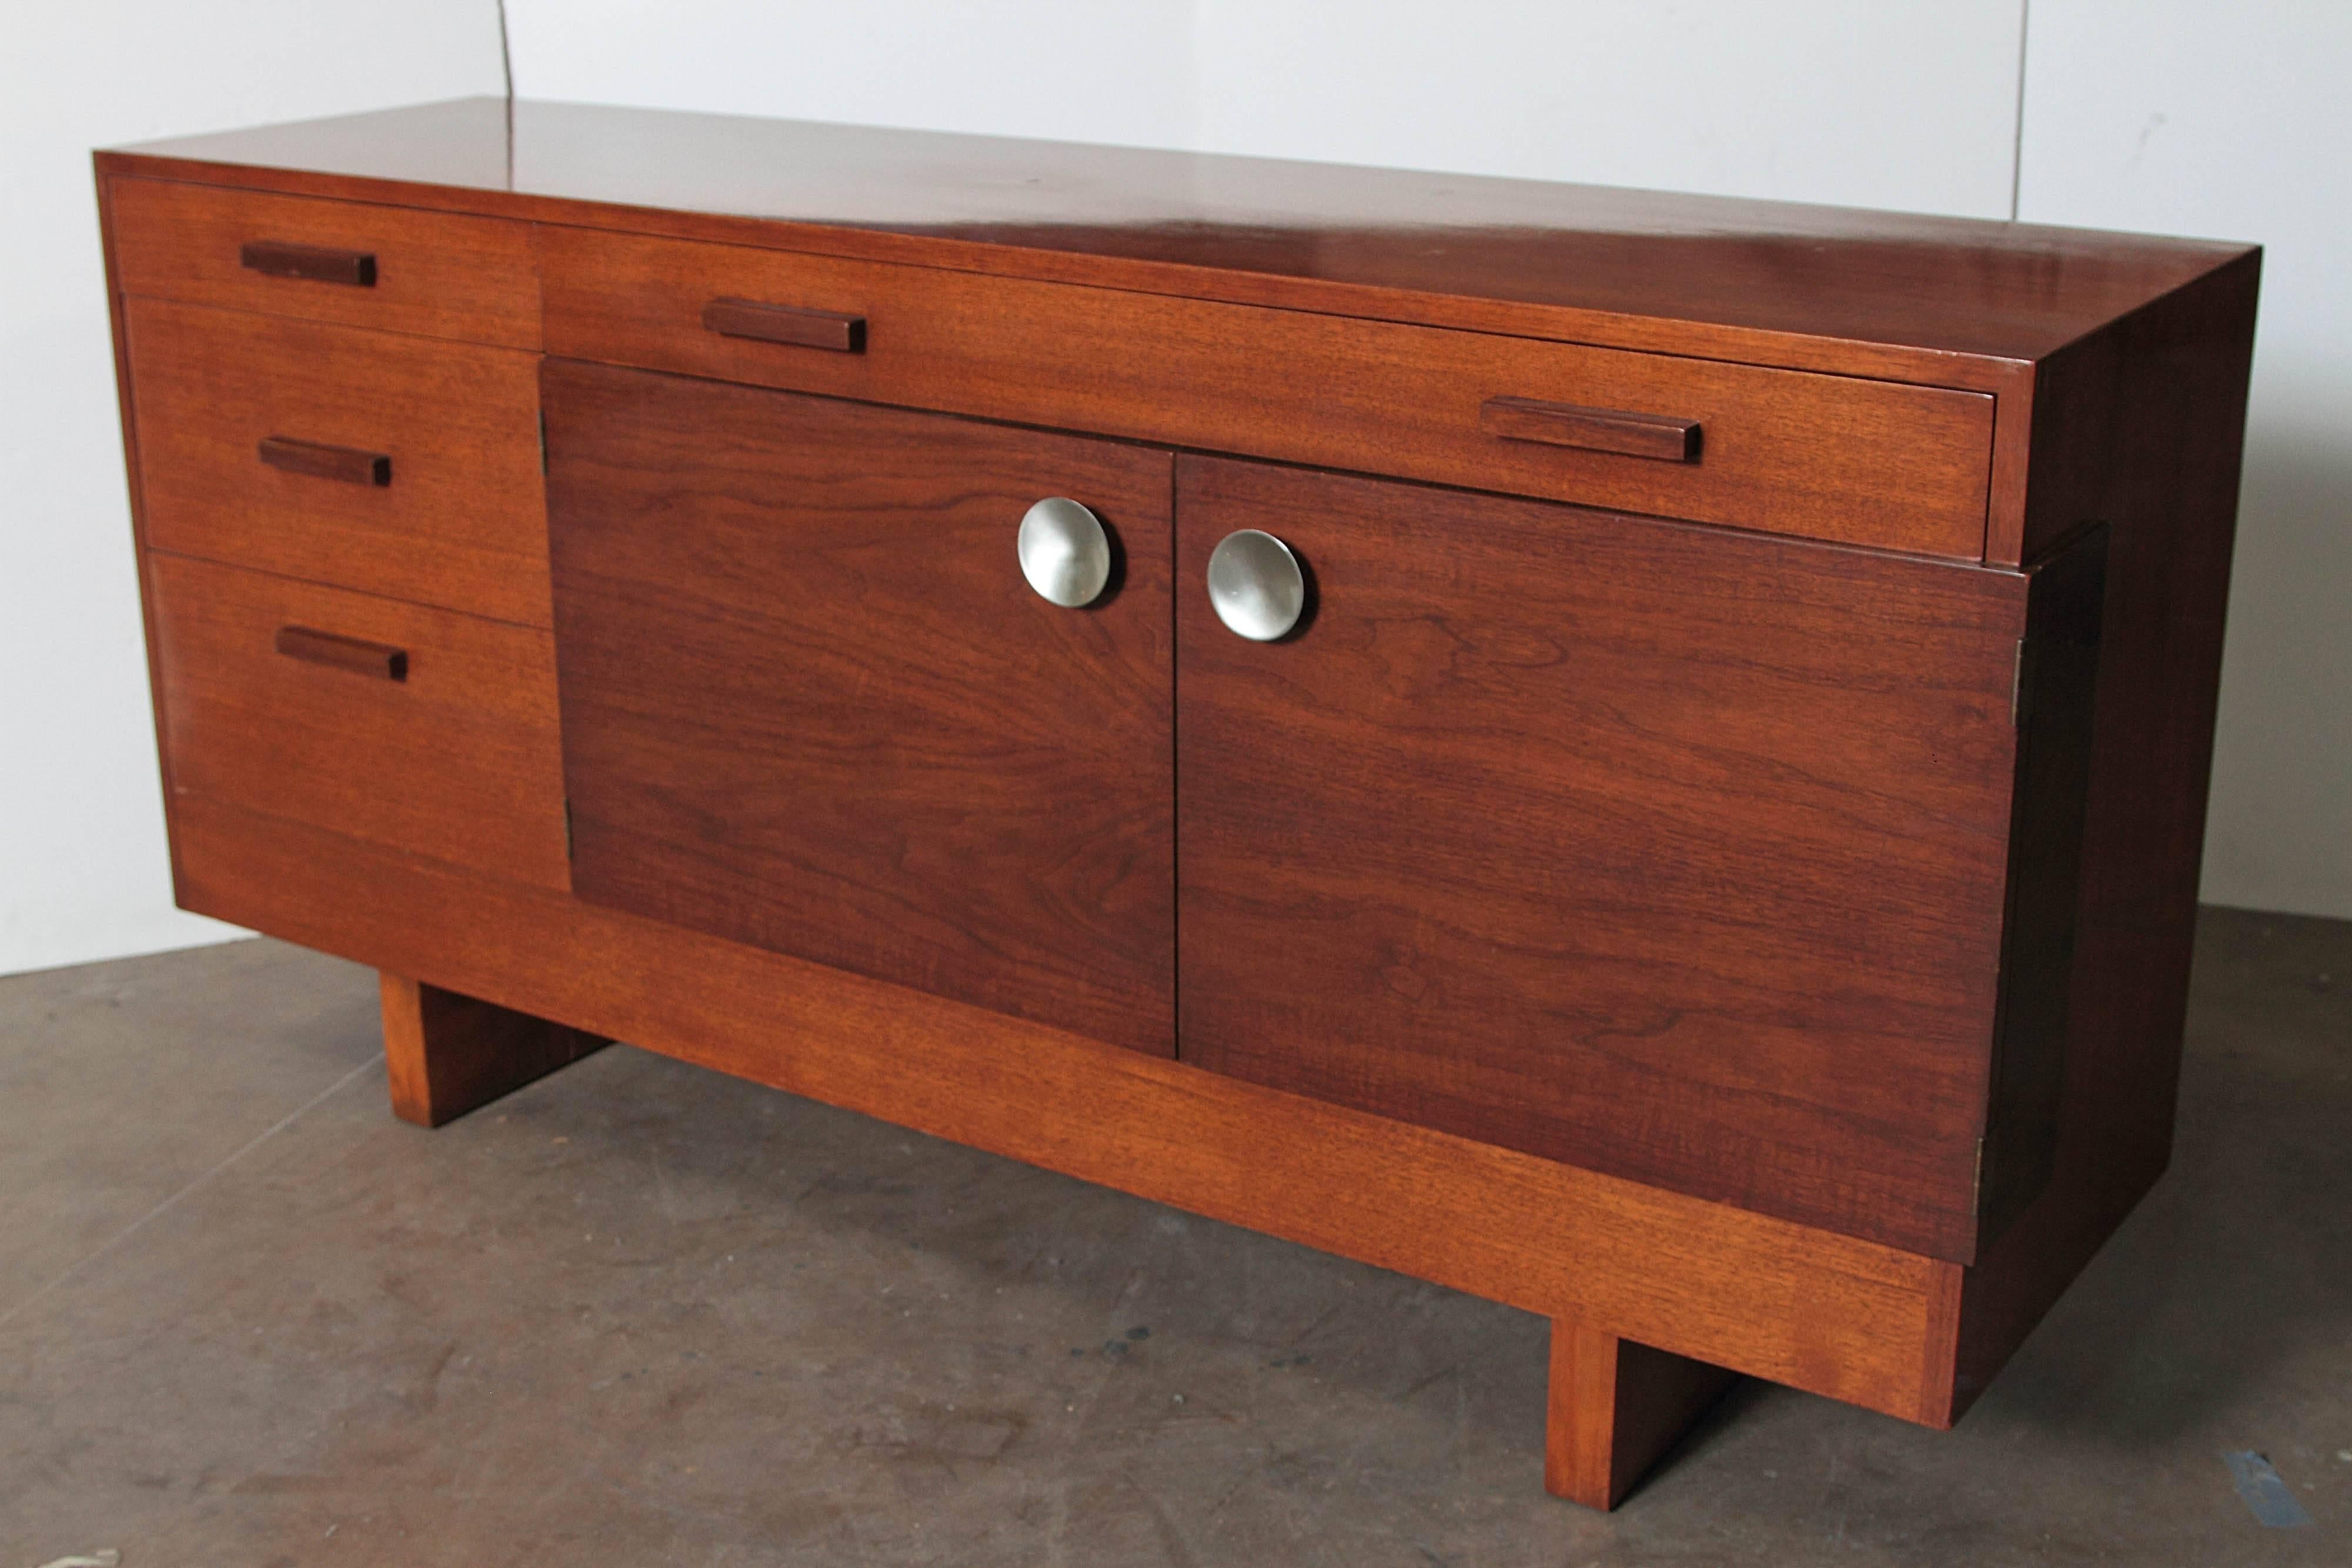 Art Deco Gilbert Rohde Herman Miller No. 3622 Buffet in two-tone walnut
Price reduced from $5800

Featured piece from the H-M Formal dining Group No. 3622.
Original two-tone walnut finish, with birch legs and satin aluminum pulls.

This is a very